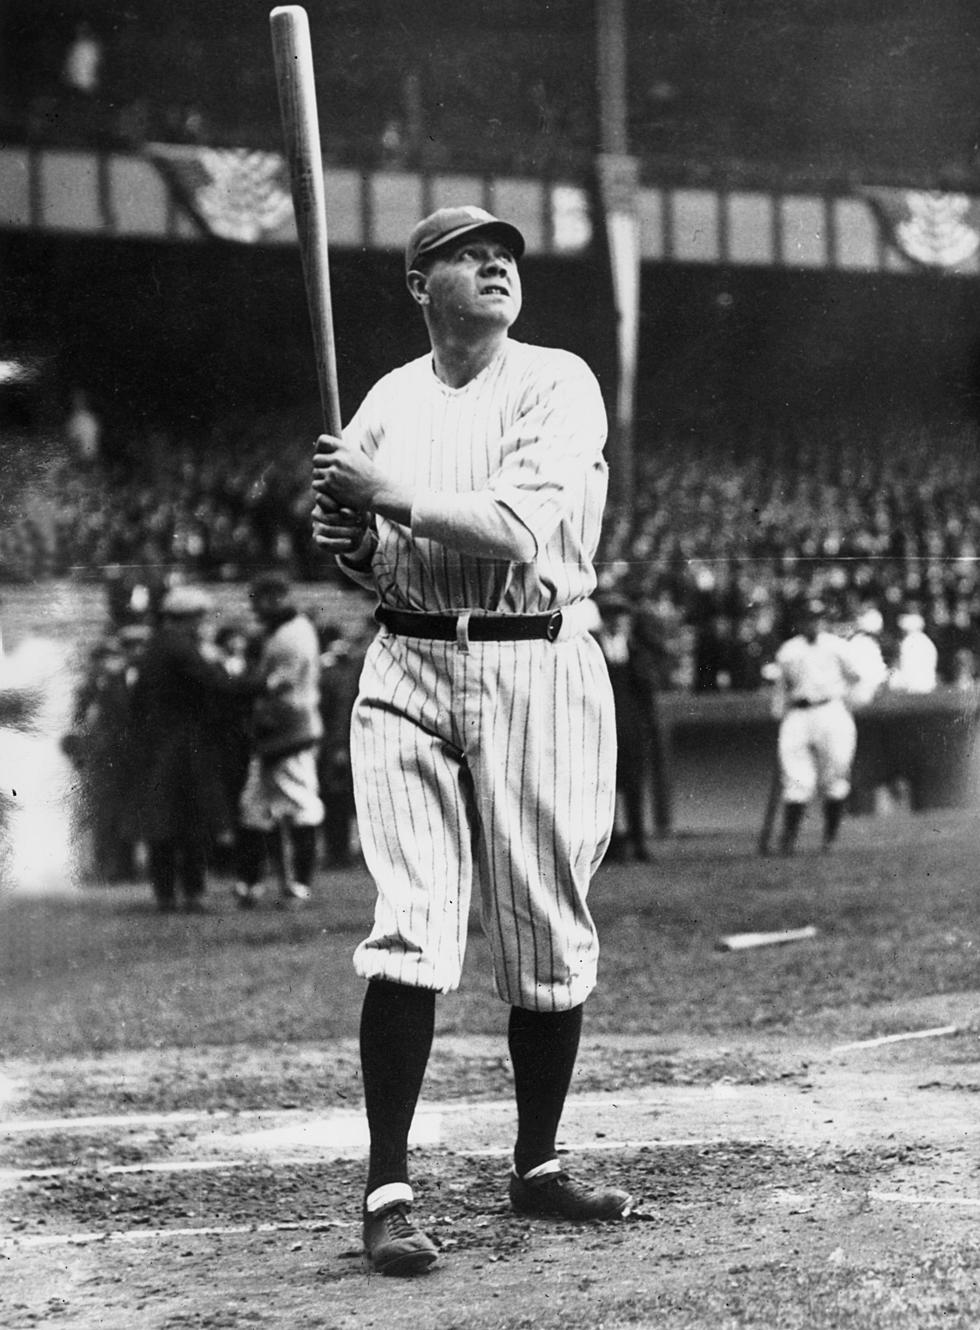 Babe Ruth Traveling Exhibit Coming to Lubbock